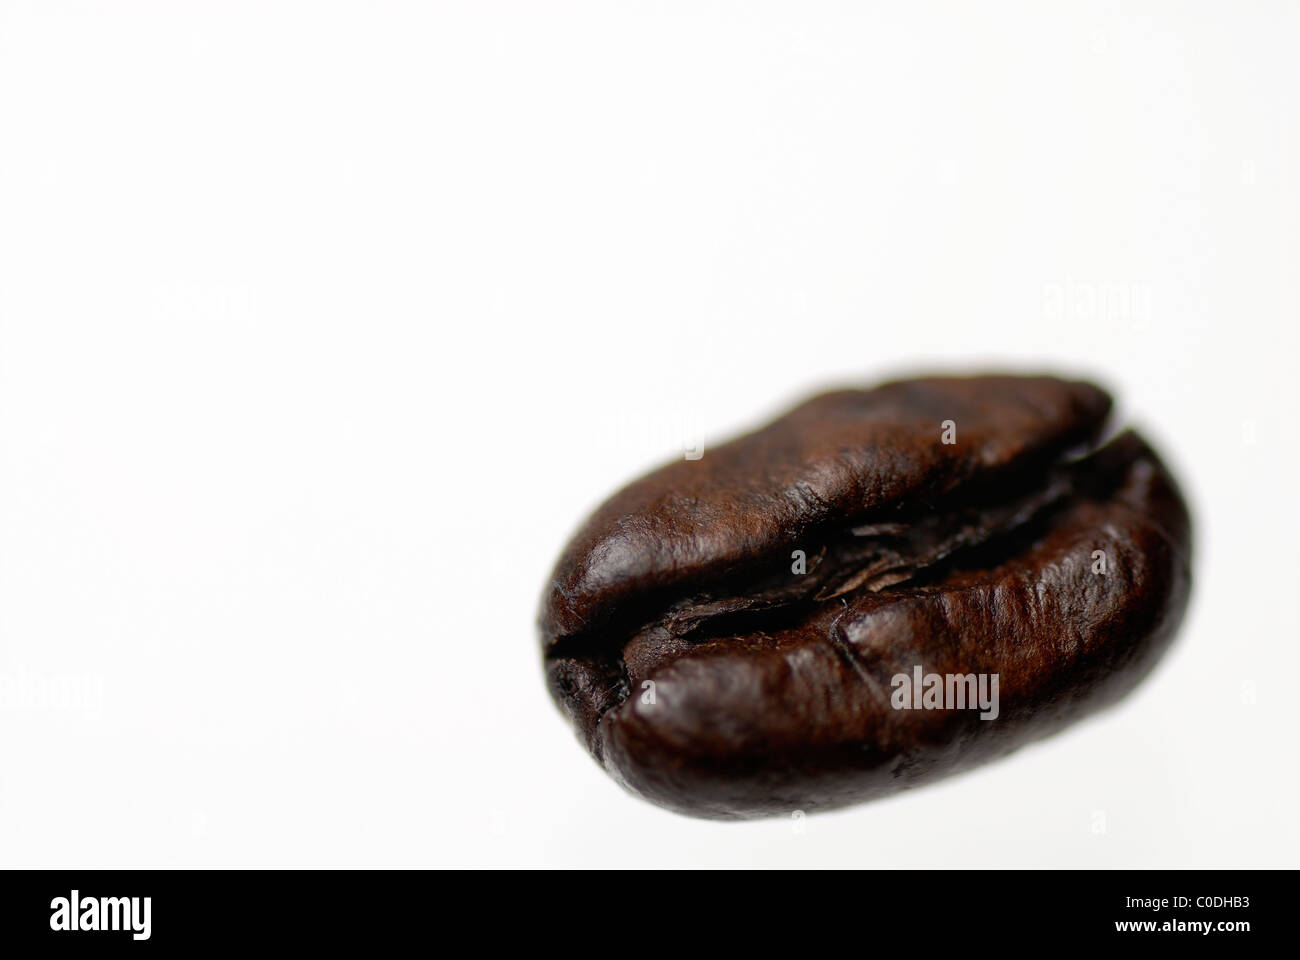 Isolated fairtrade, arabica, coffee bean on white background. Stock Photo